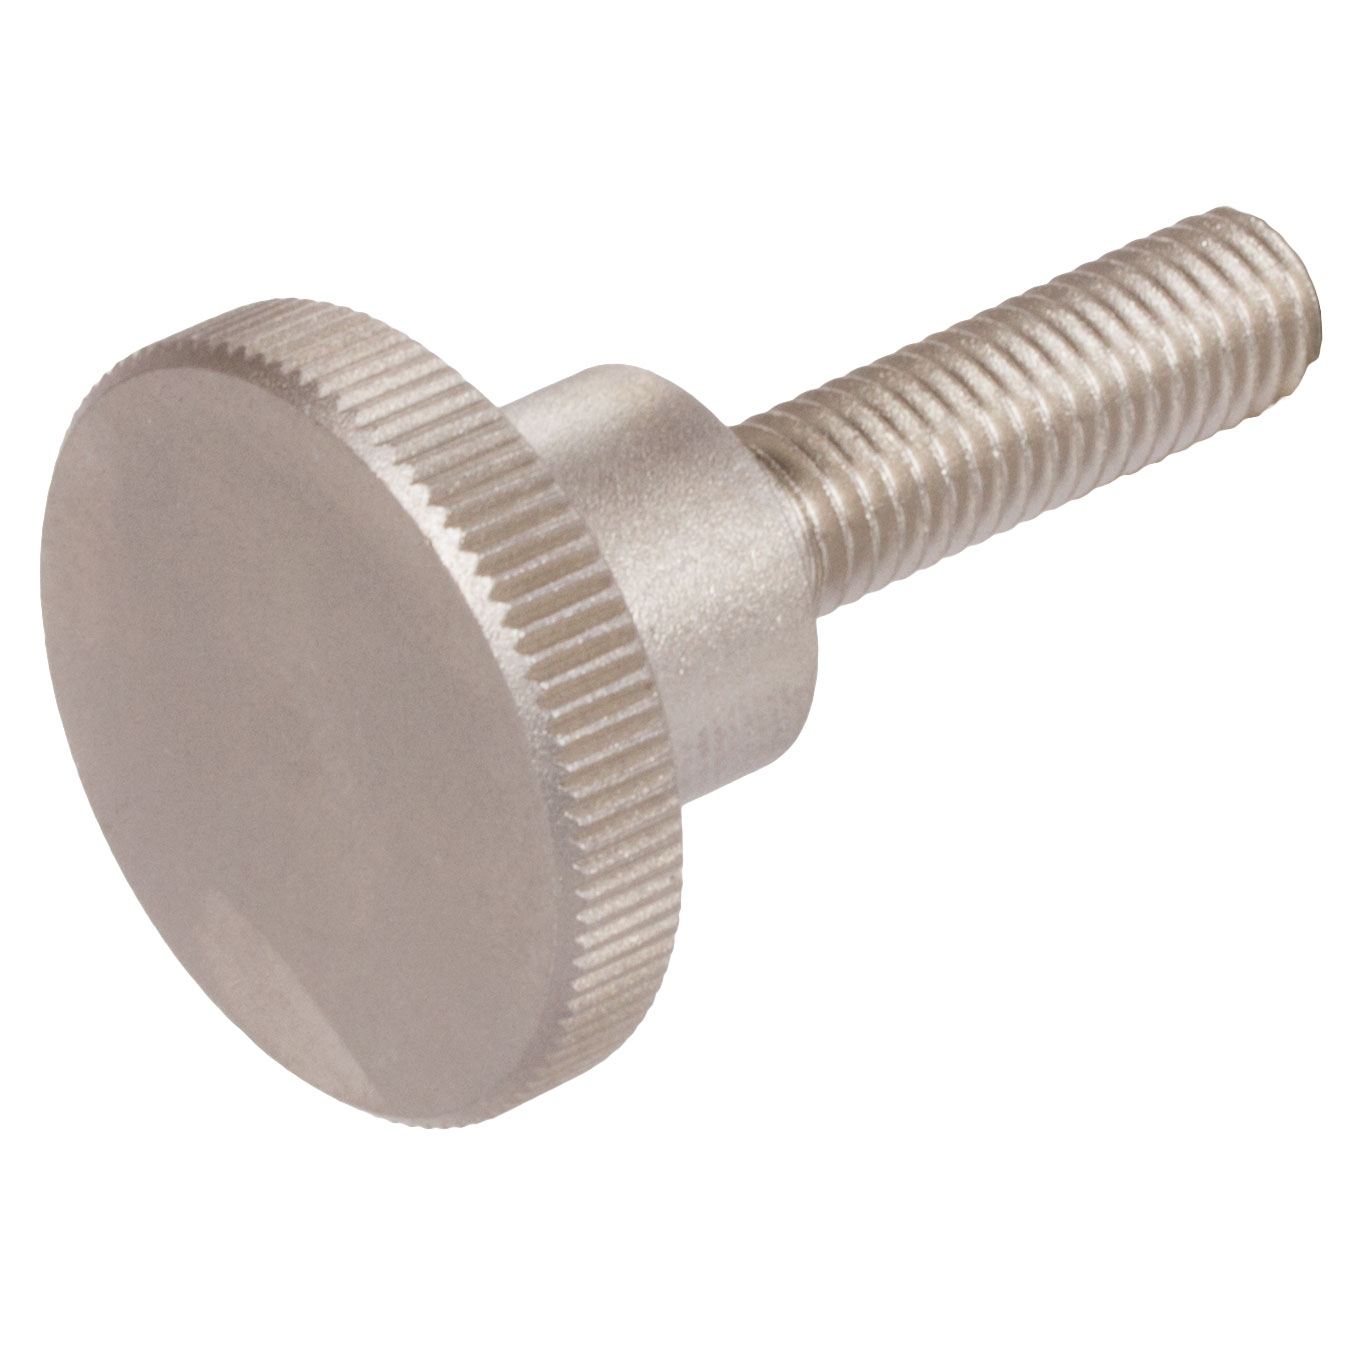 Knurled thumb screw DIN 464 M8 x 20mm long stainless steel 1.4305 SKU:  65499225 - Maedler North America